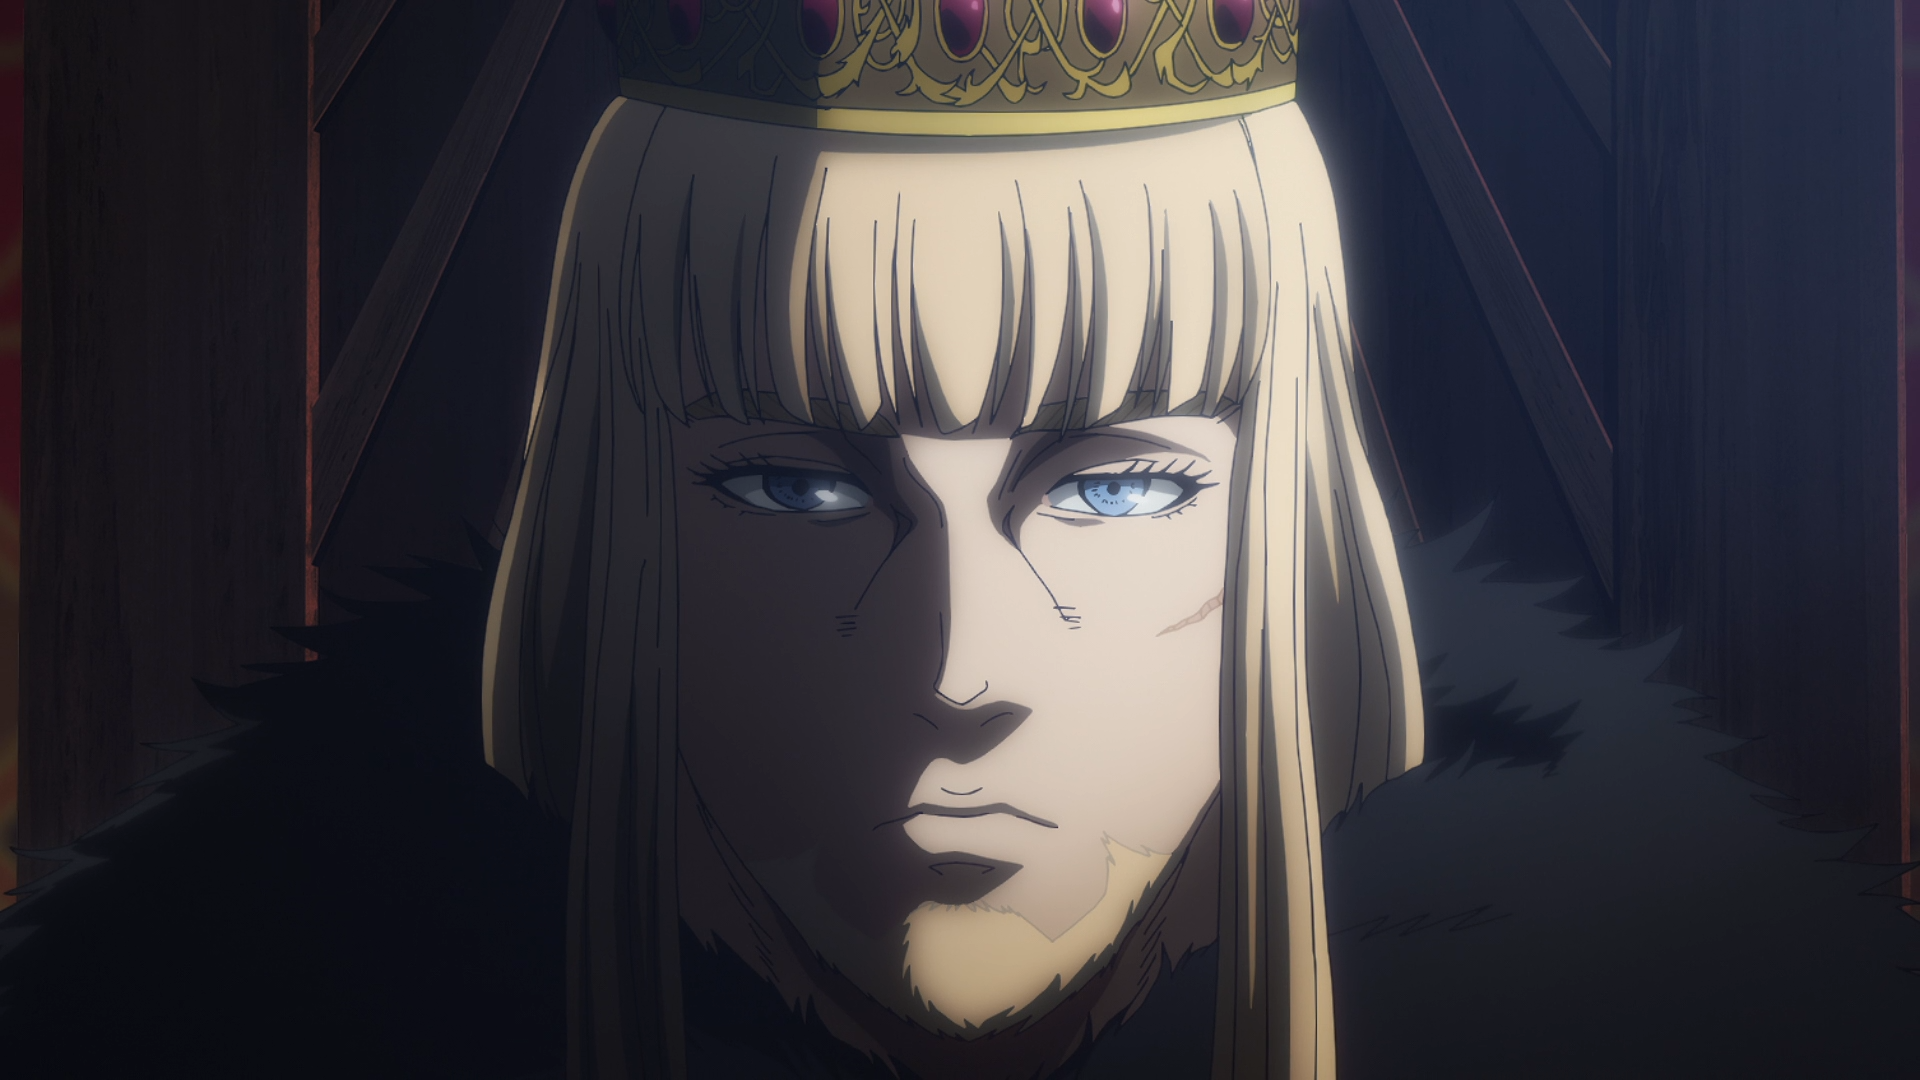 Canute's Leadership in England – Vinland Saga S2 Ep 5 & 6 Review